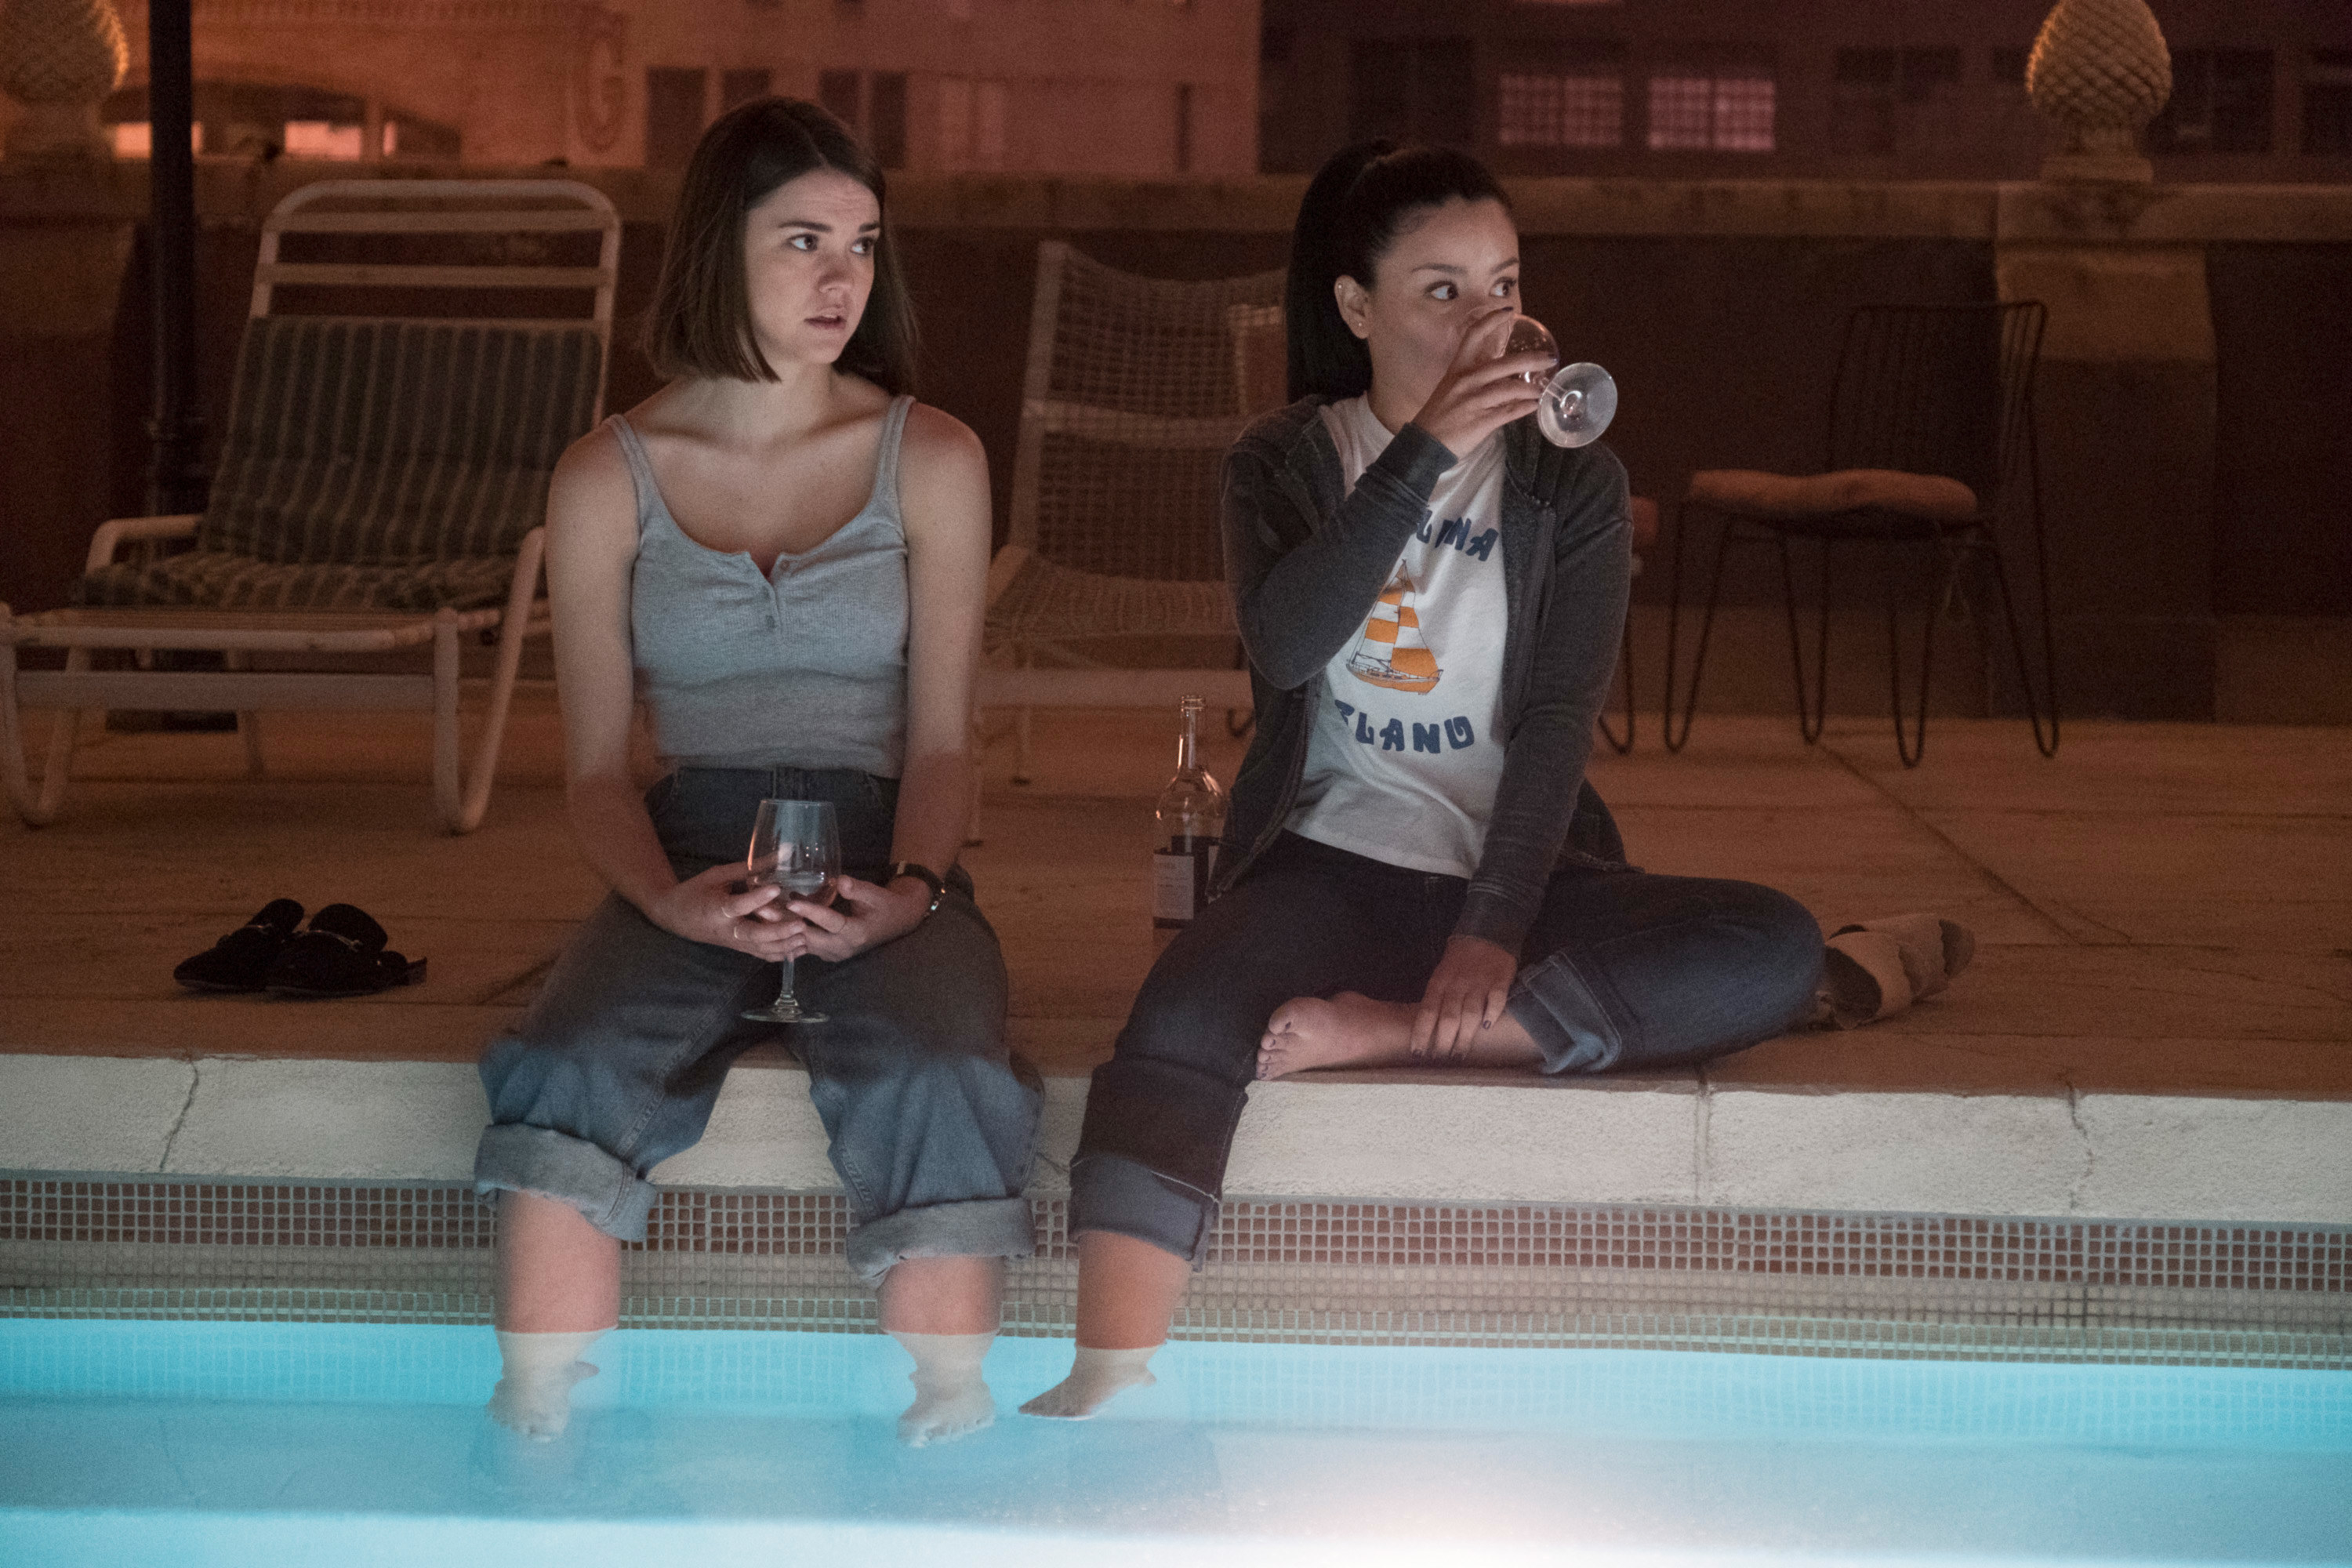 Callie and her sister drink wine with their feet in the pool